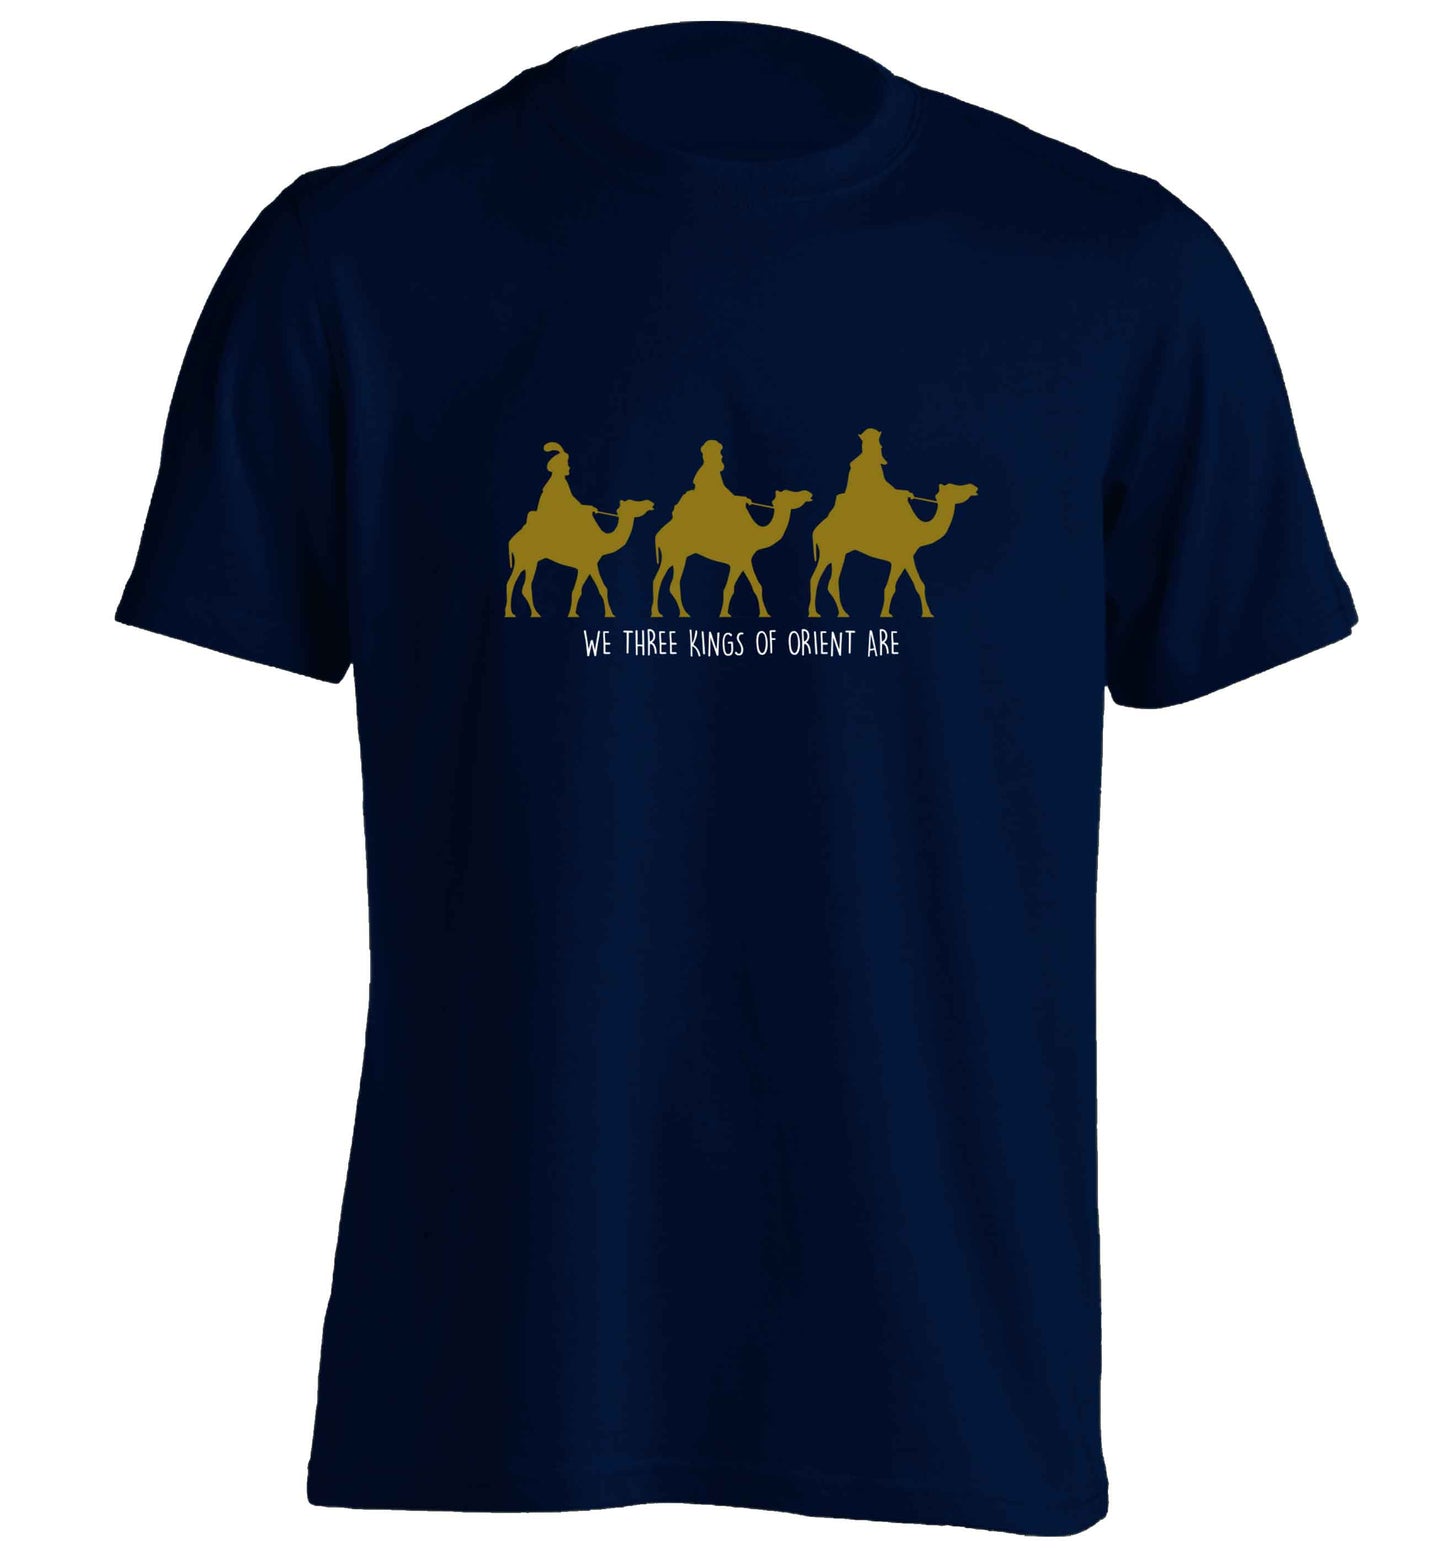 We three kings of orient are adults unisex navy Tshirt 2XL